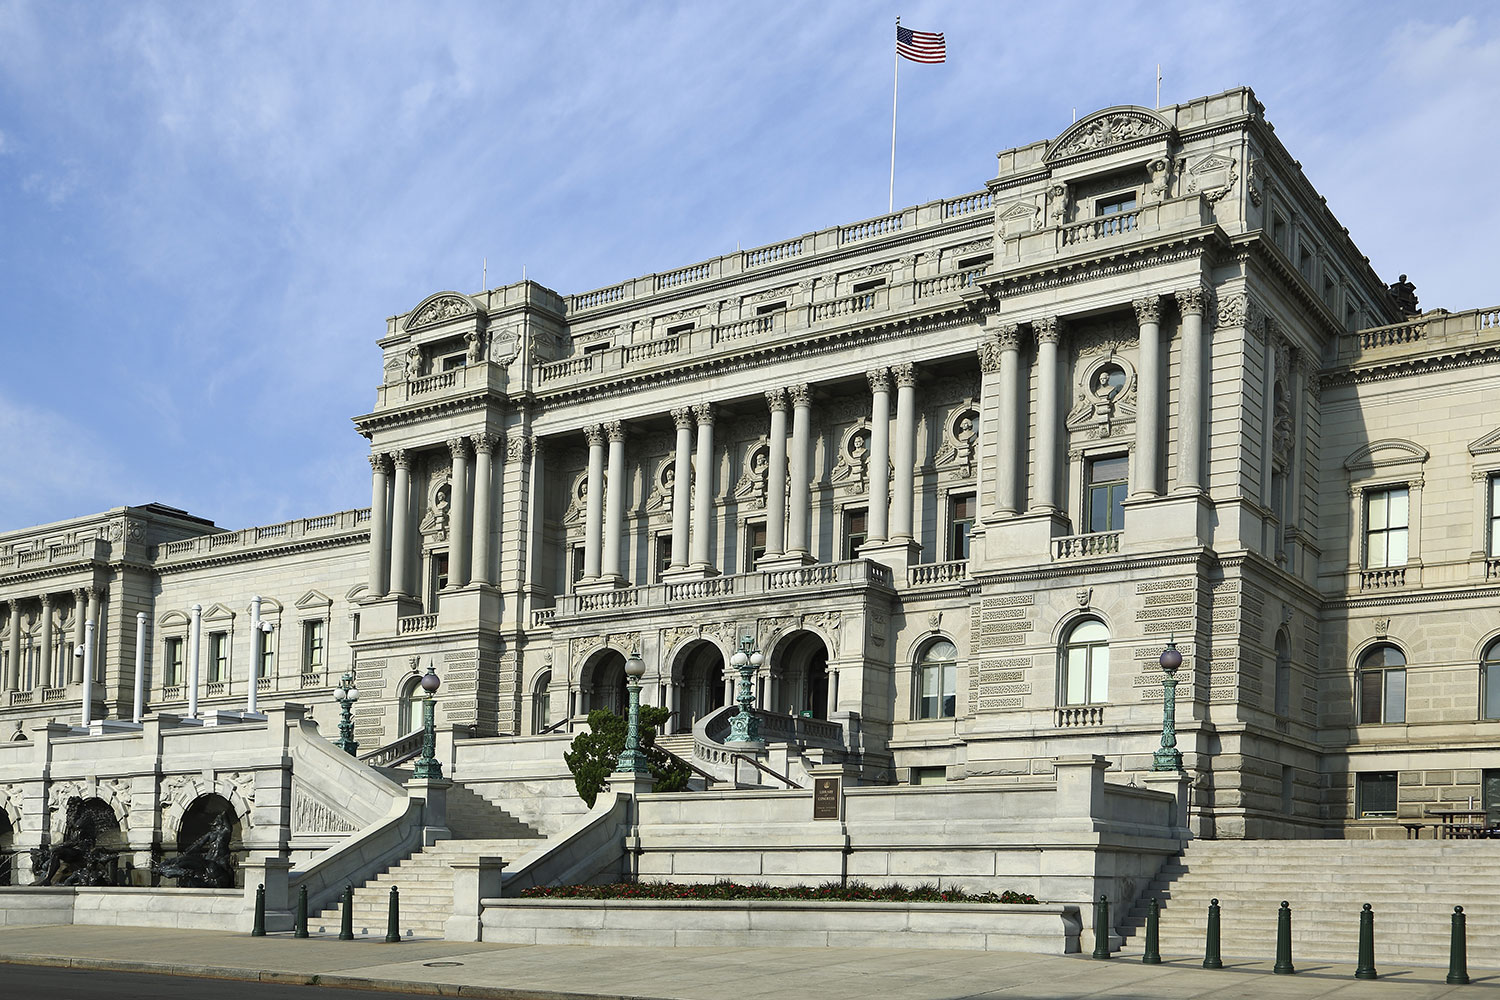 Library of Congress in Washington, D.C.